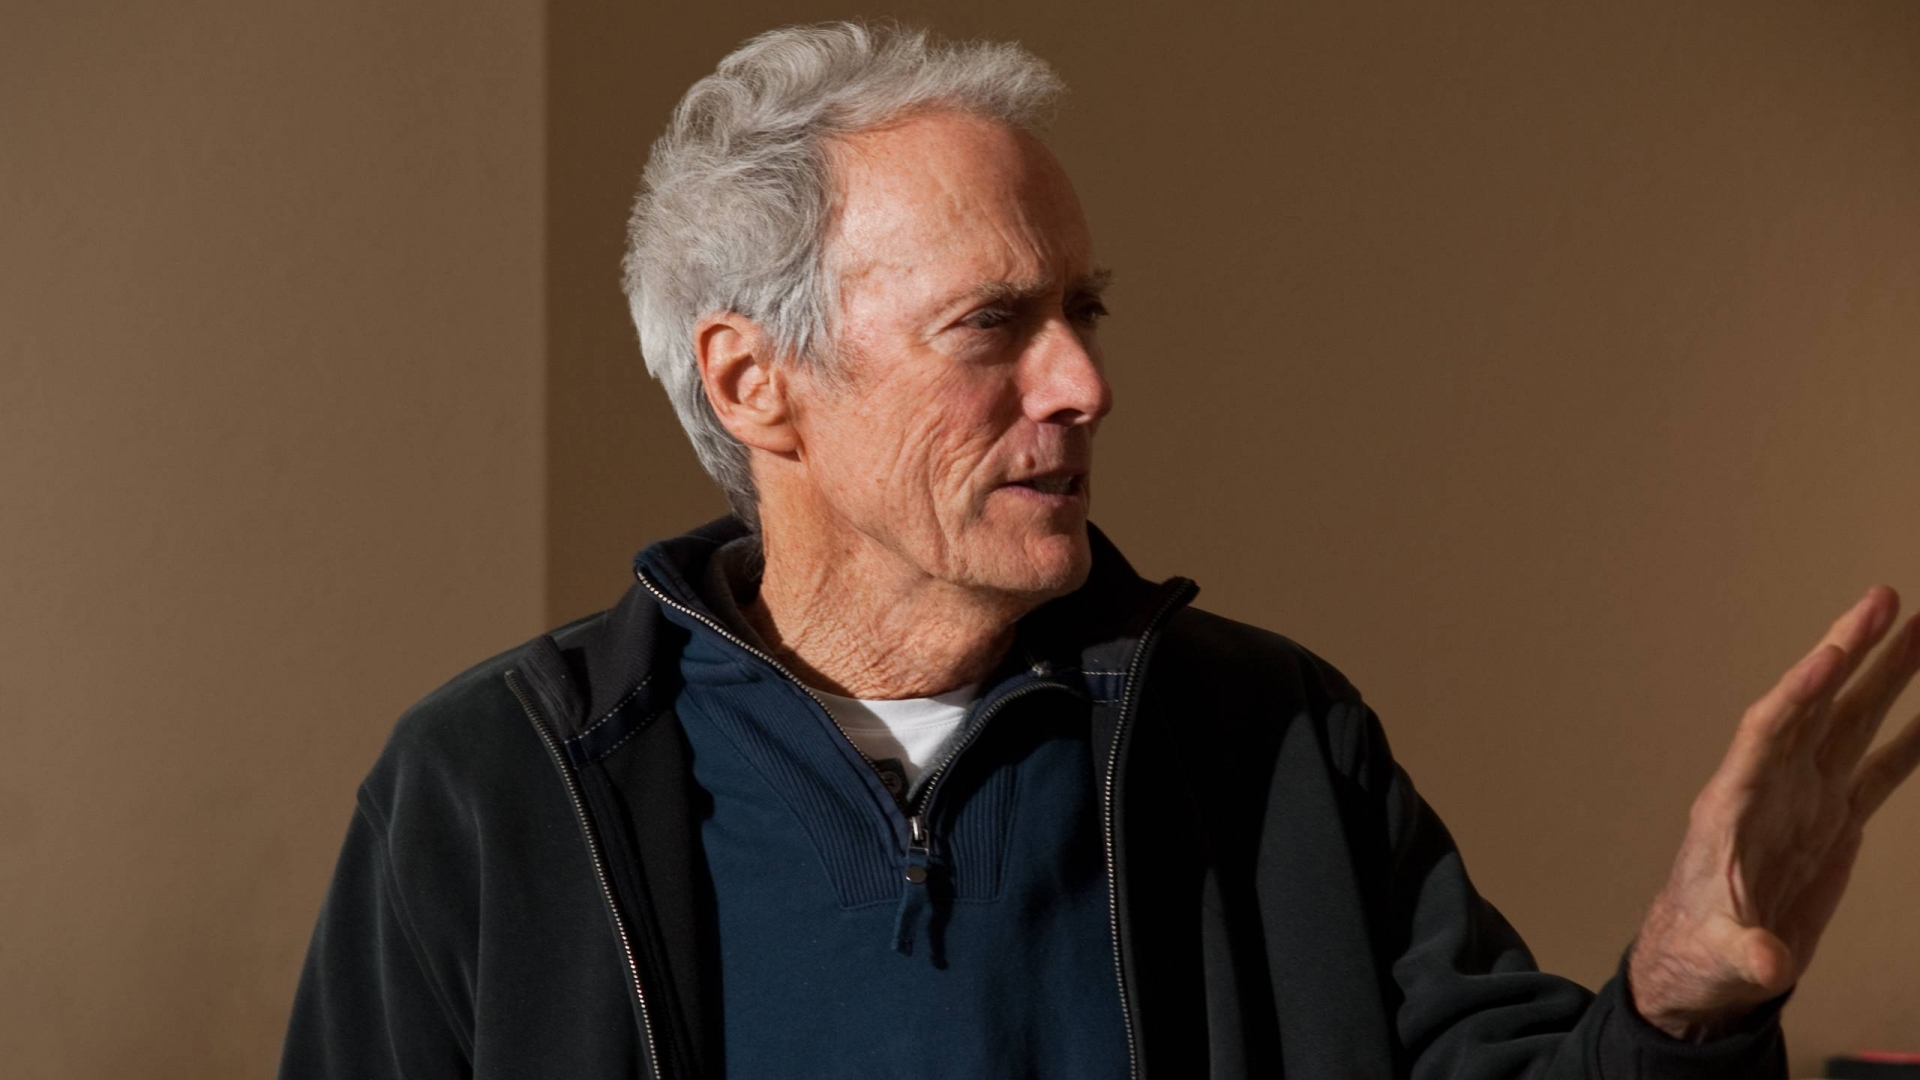 Clint Eastwood Close-Up for 1920 x 1080 HDTV 1080p resolution